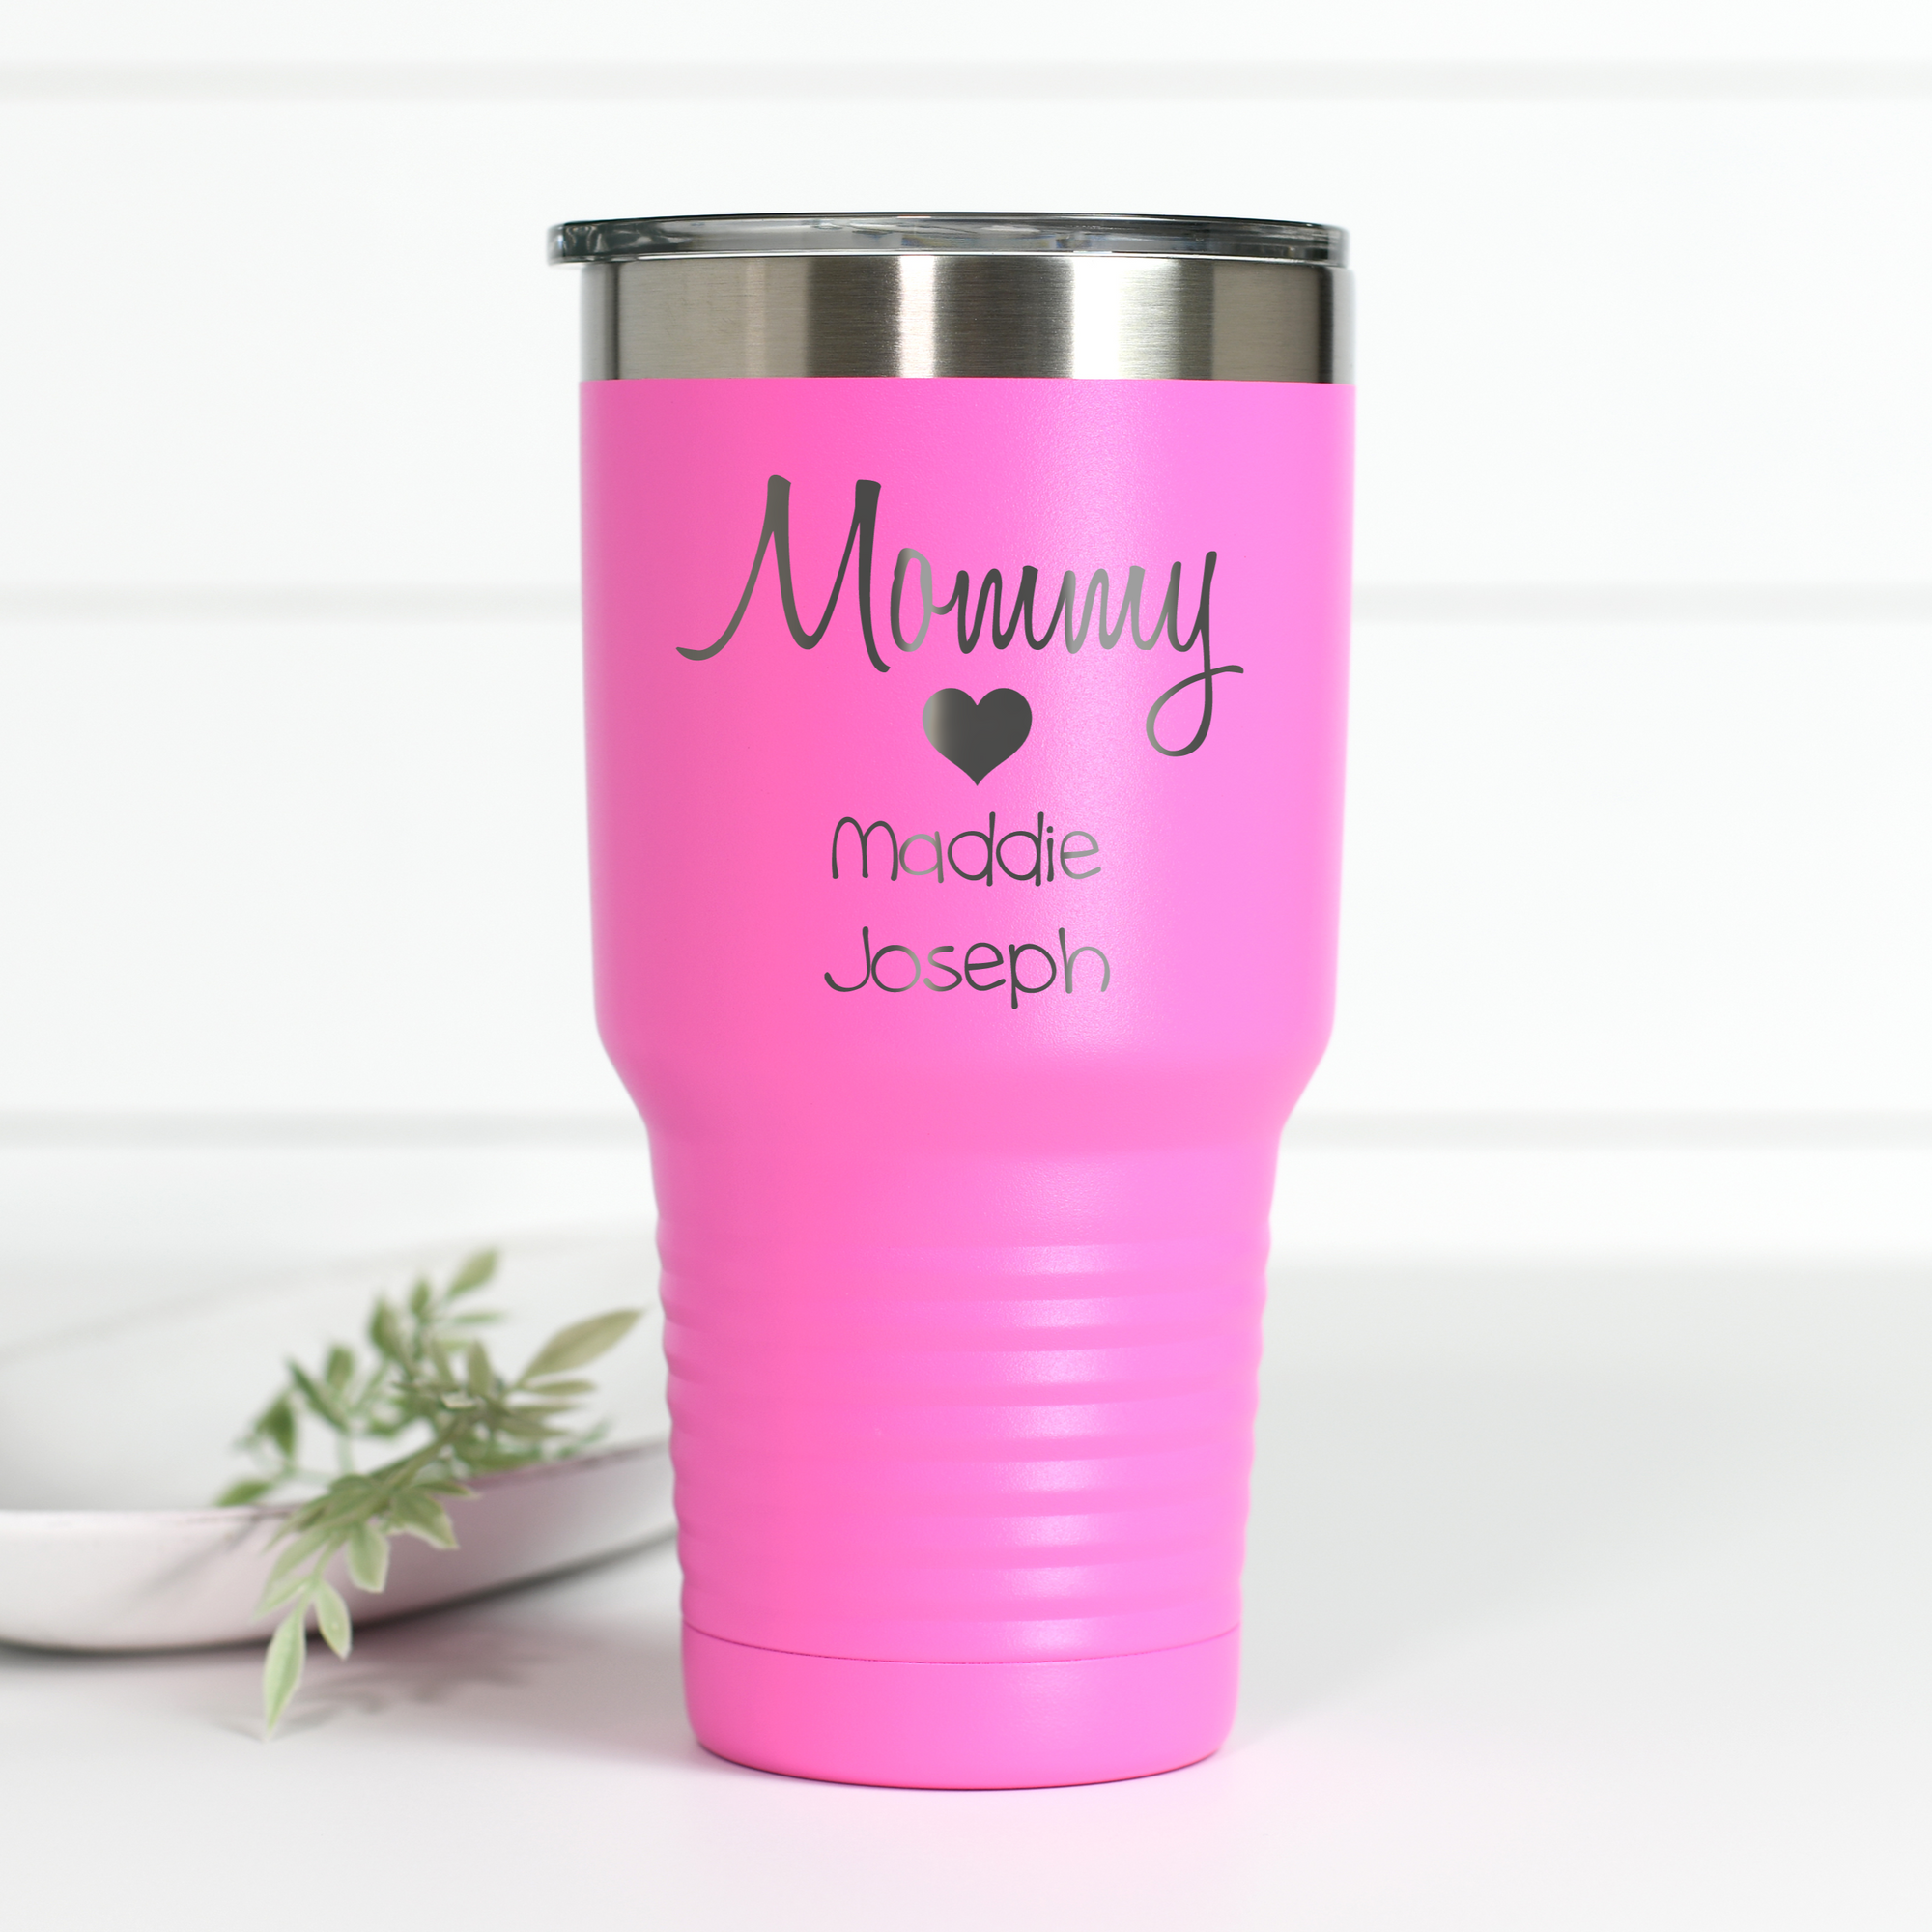 https://cdn.shopify.com/s/files/1/2109/3813/products/mommypersonalized30oz_2000x.png?v=1673557687